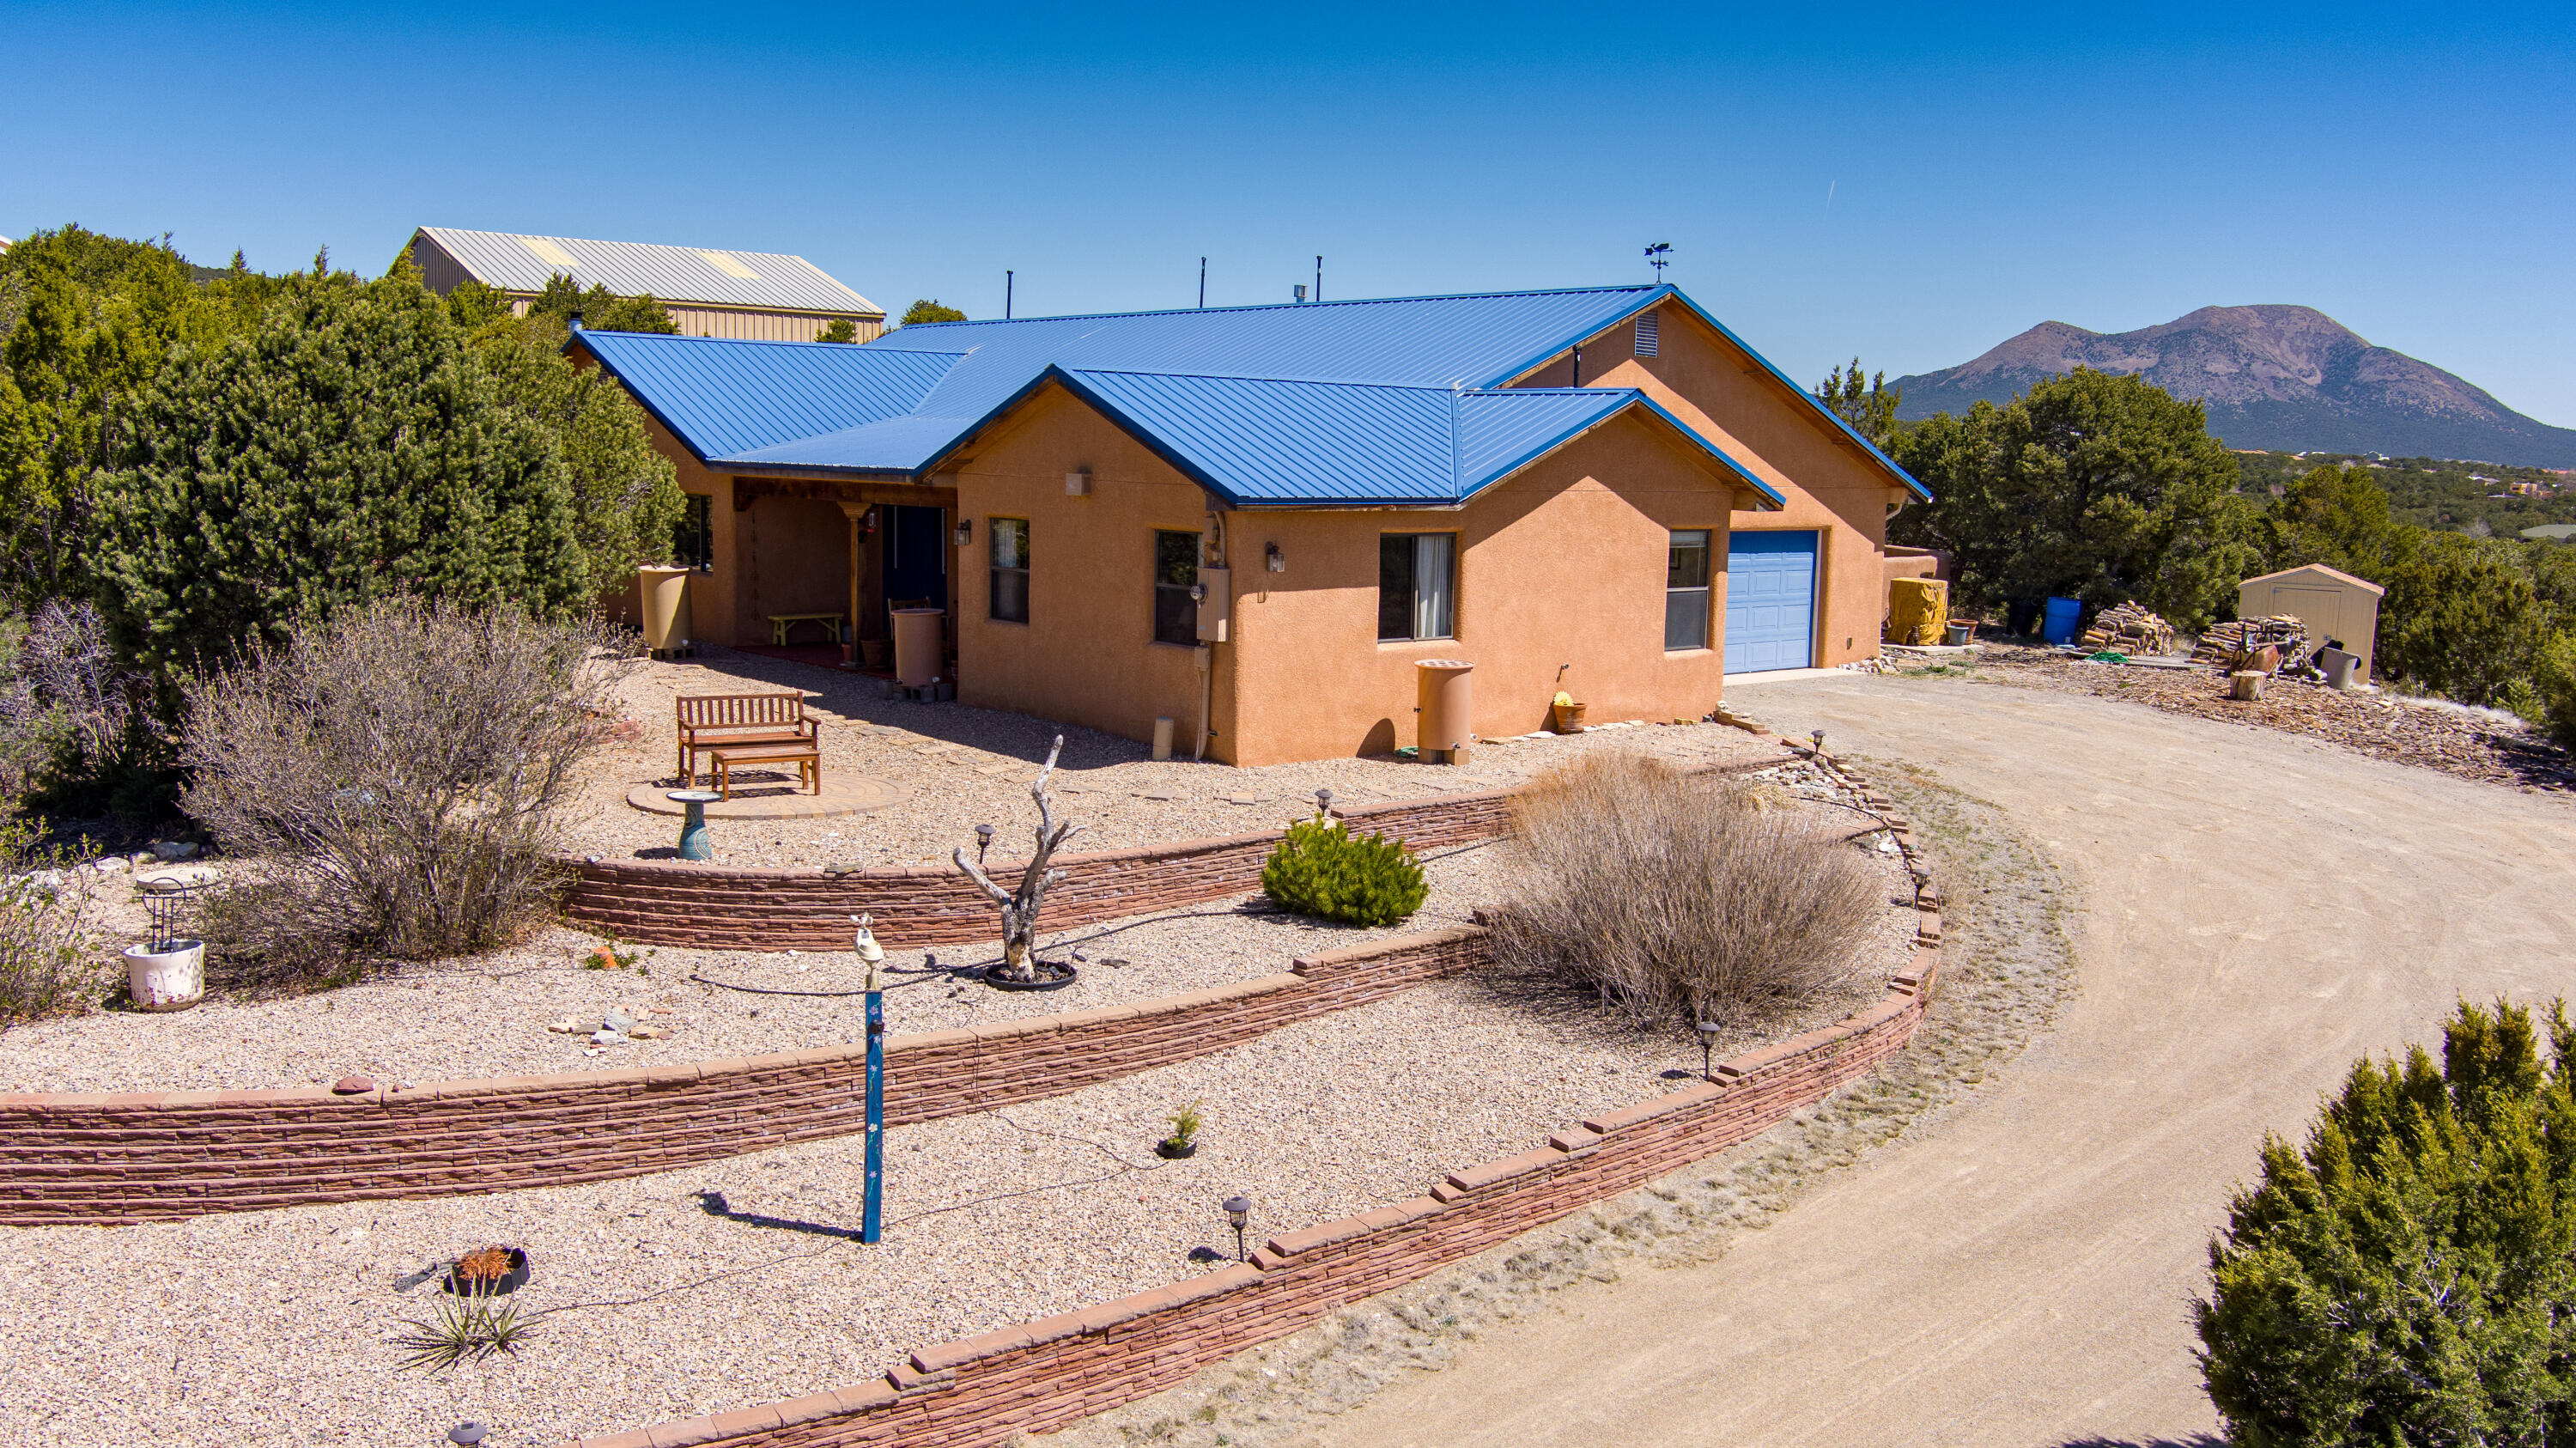 Open House Sat, 4/20, 11-1pm, Sun 4/21, 2-4pm.  First time offered! This custom dream retreat nestled atop a wooded hill, offers serenity and stunning views of the majestic Sandia Mountains. This warm and inviting single-level home boasts 3 bedrooms plus an office, perfect for work-from-home days. With 2 spacious living areas and a thoughtfully designed open floor plan, this home is ideal for relaxation and entertaining. Custom wood cabinetry crafted by a local artisan adds character and charm throughout. Step outside to your private courtyard oasis, complete with lush gardens and a covered porch, perfect for enjoying the tranquil surroundings. Hardwood floors enhance the cozy atmosphere. Oversized 2-car garage & shed. Paved roads, community water, underground utilities, (con't)